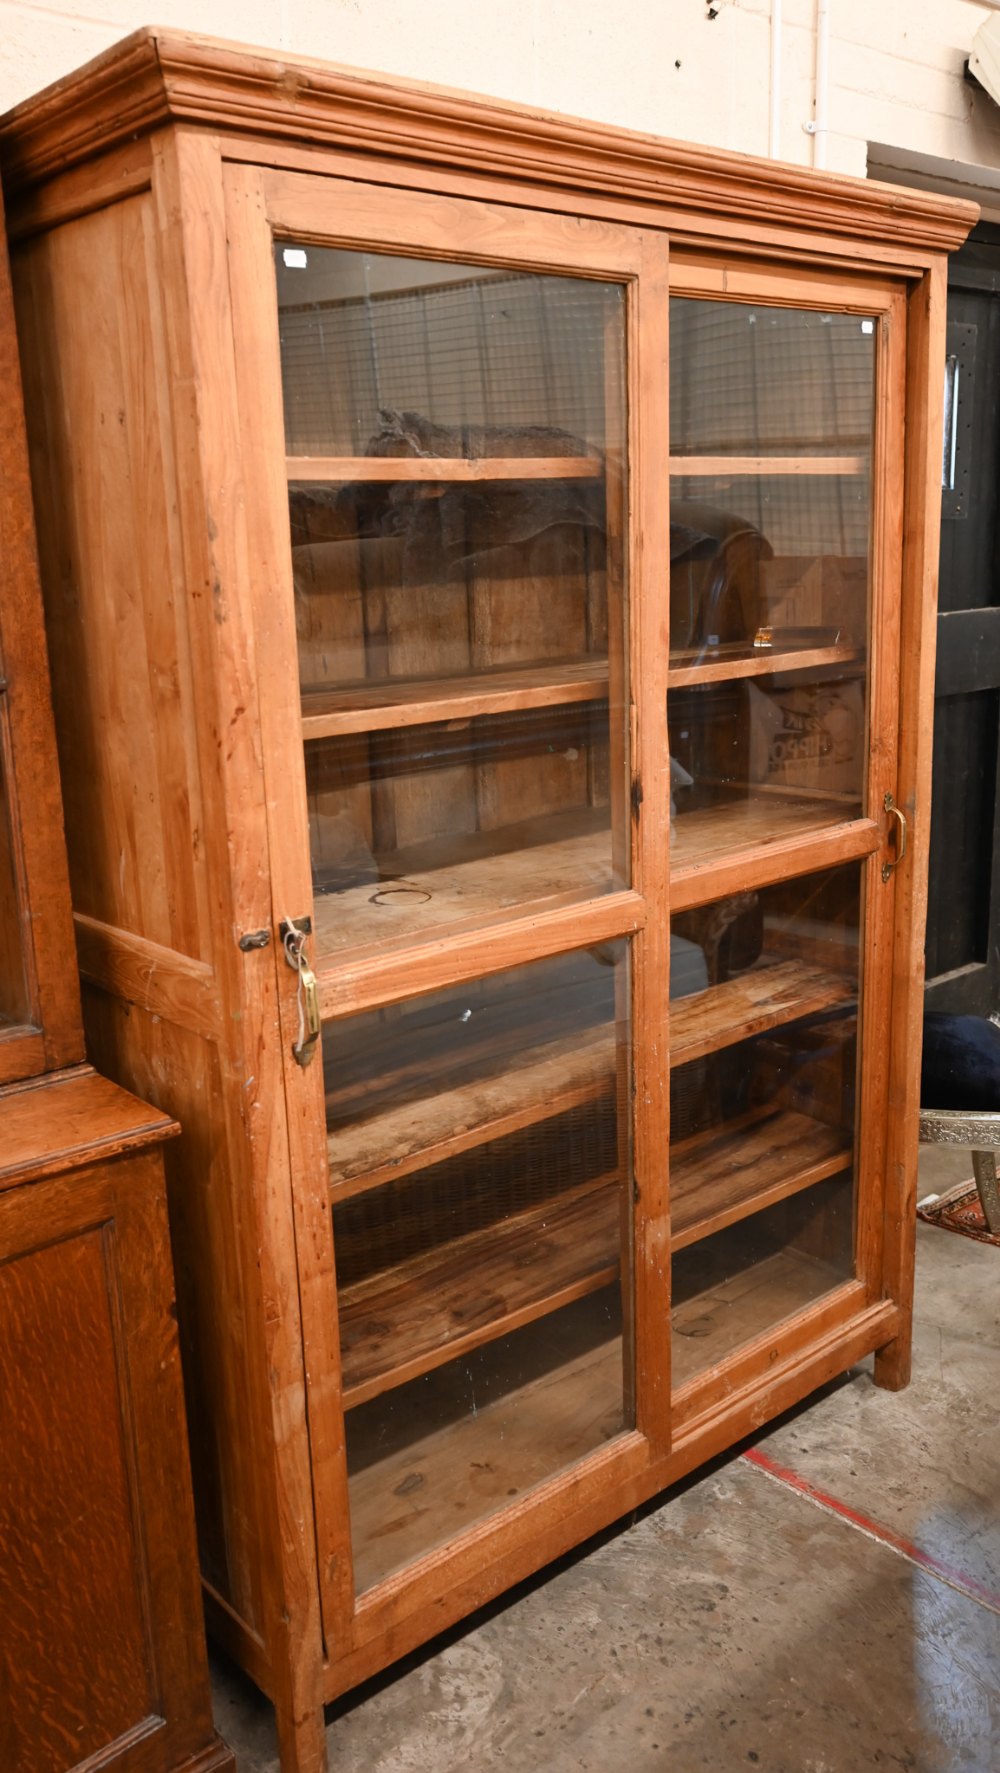 A stained hardwood bookcase with glazed sliding doors enclosing five shelves, 130 cm wide x 55 cm